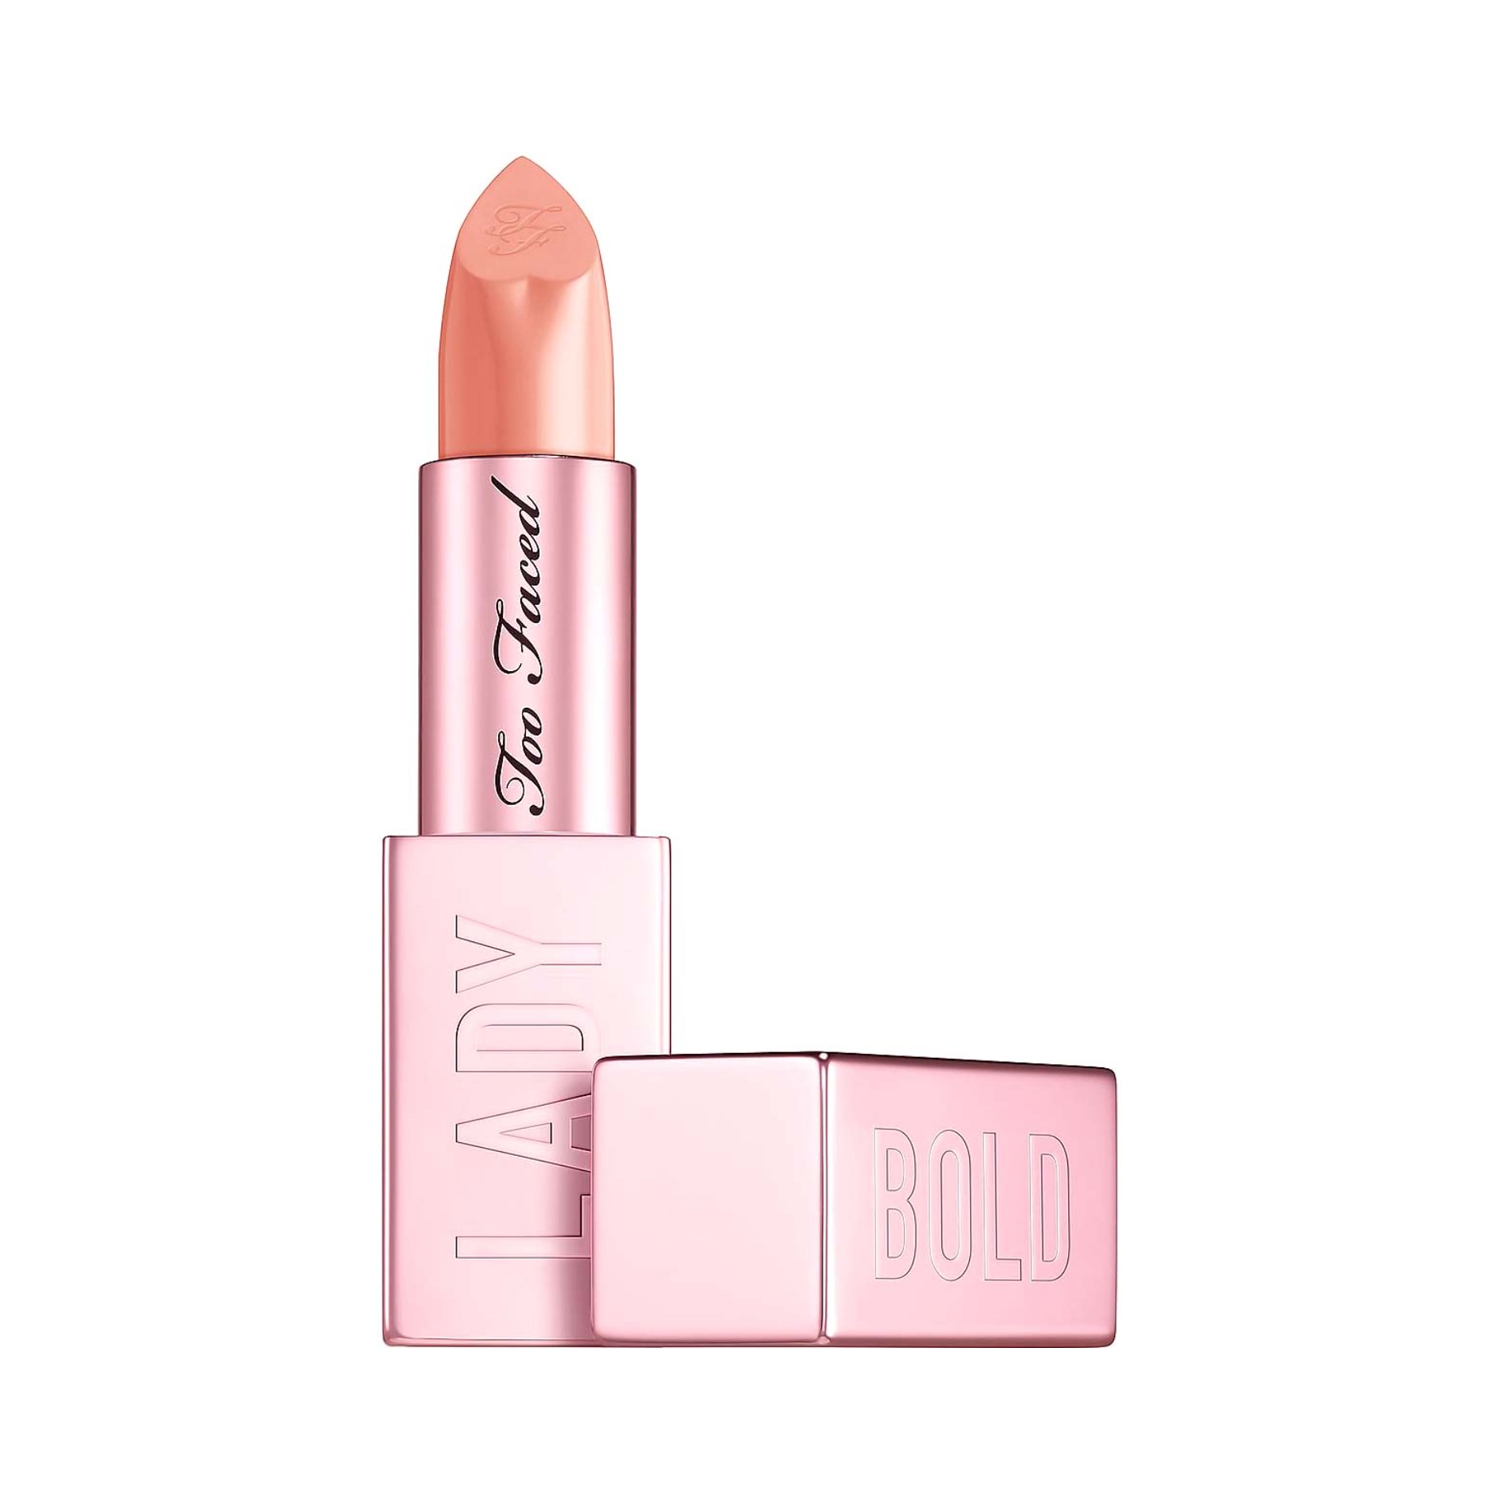 Too Faced | Too Faced Lady Bold Cream Lipstick - Brave (4g)